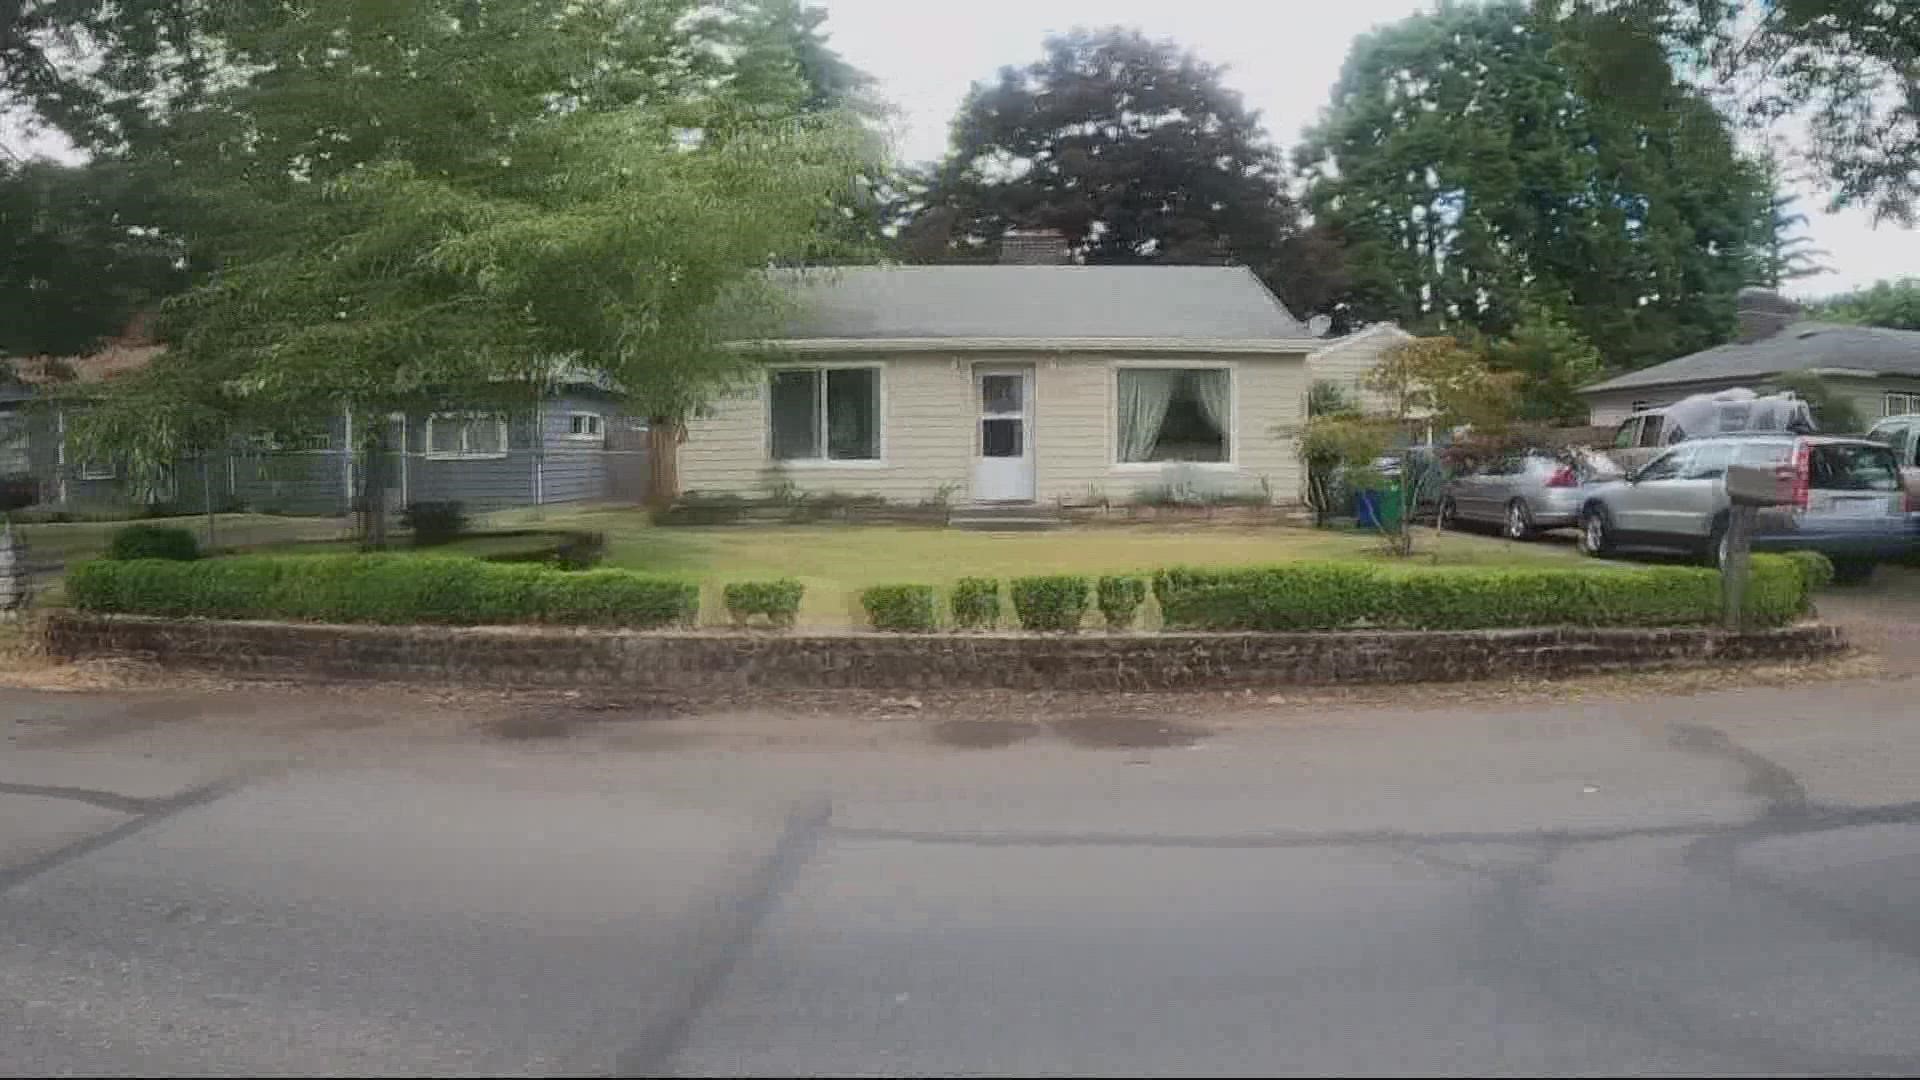 Homeless squatters took over a vacant house in southeast Portland. Neighbors say they haven't been able to get anyone to help.